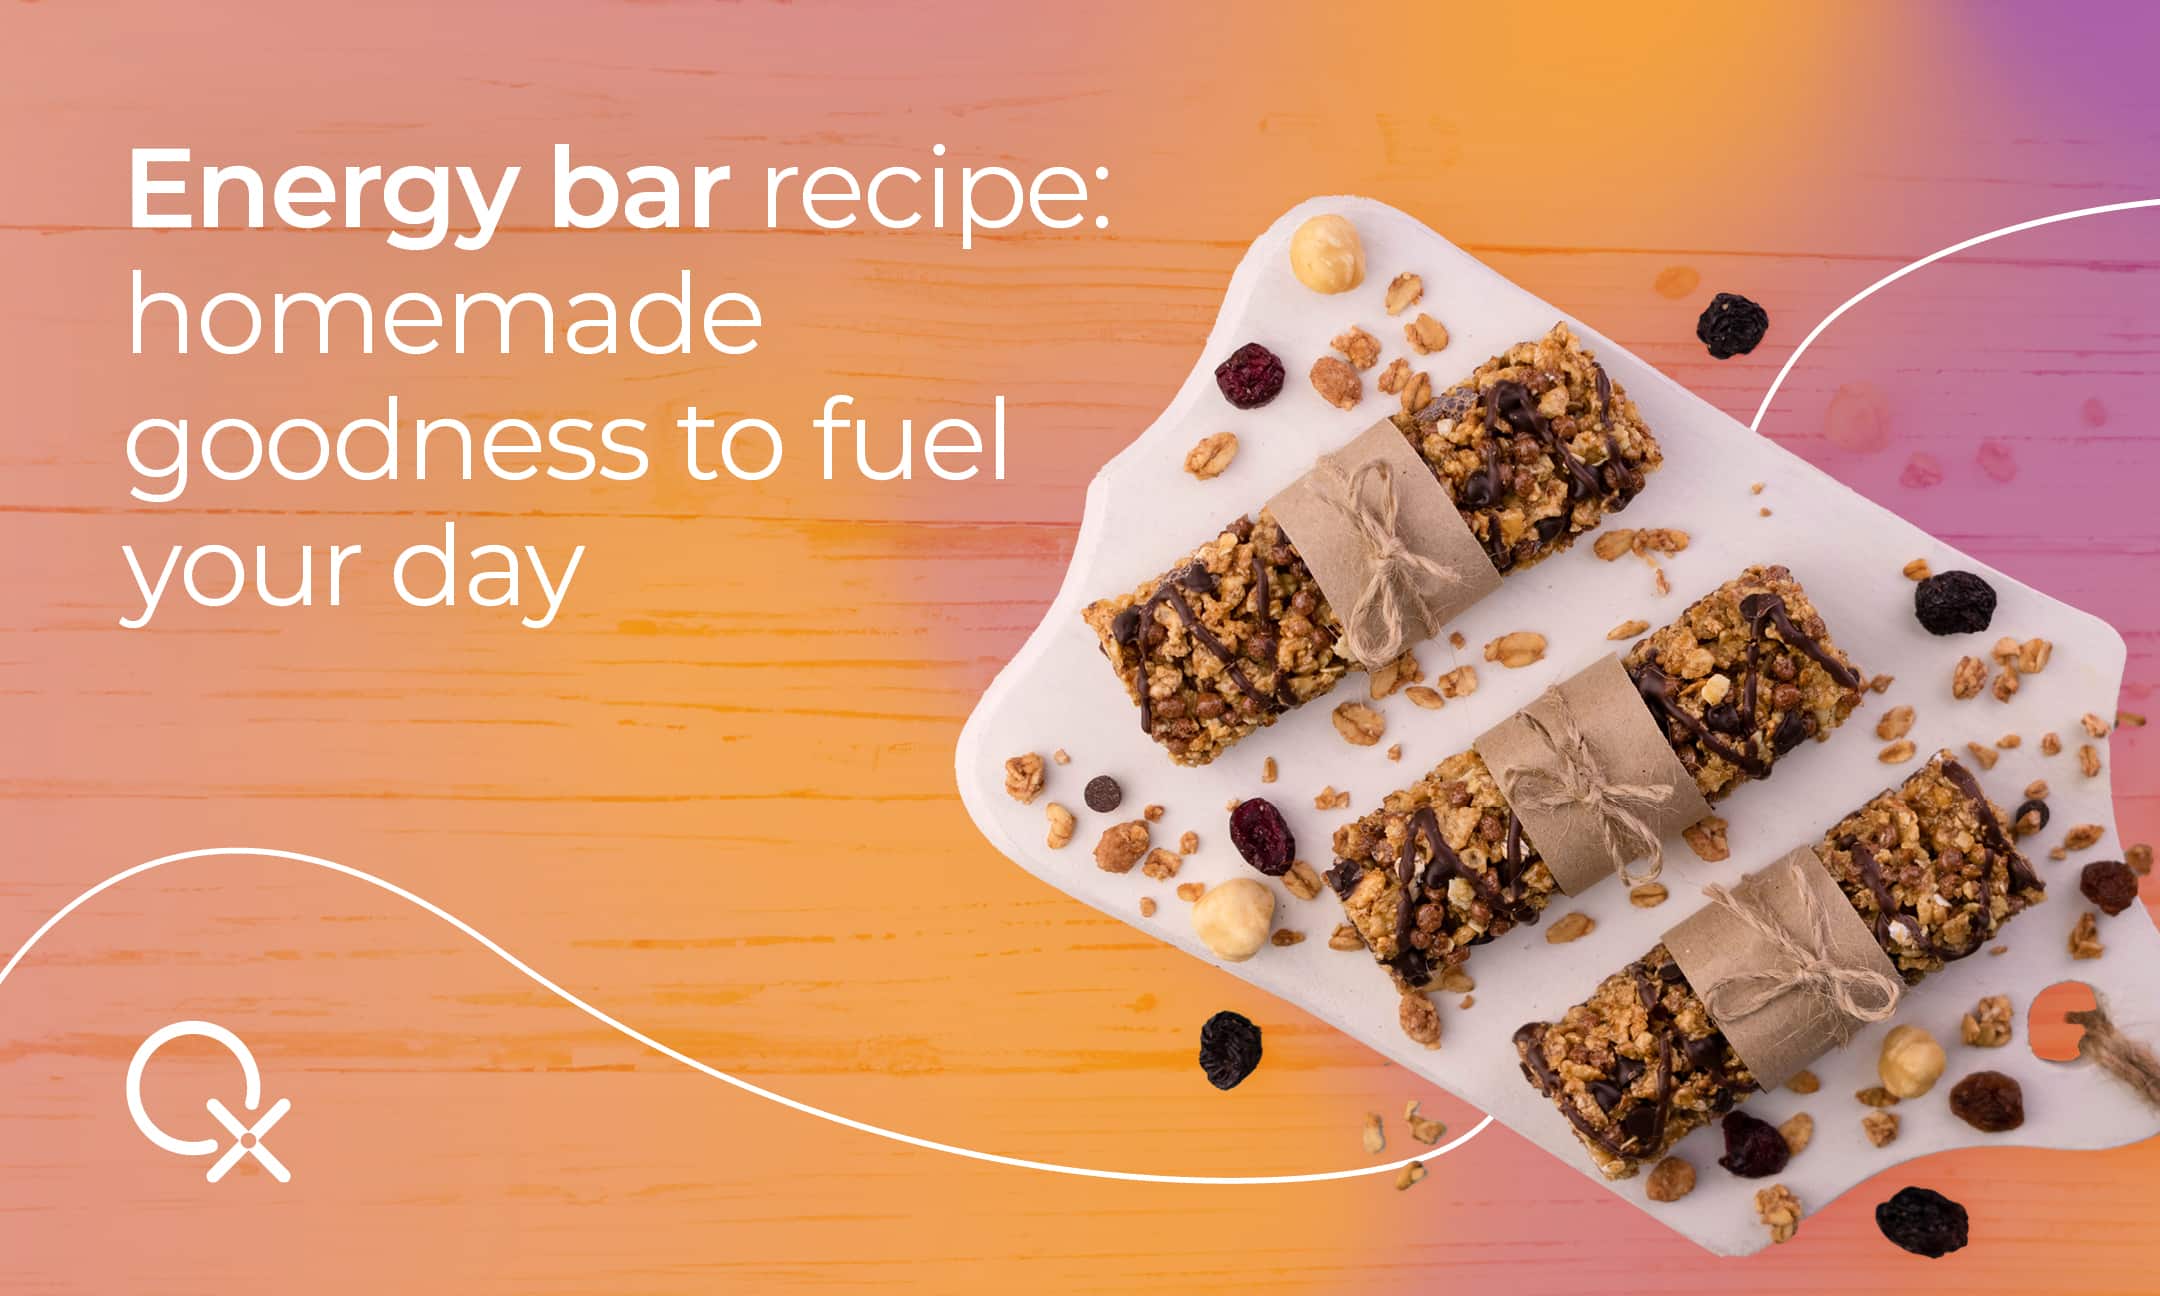 Homemade energy bars packed with fiber, protein and natural sugars.